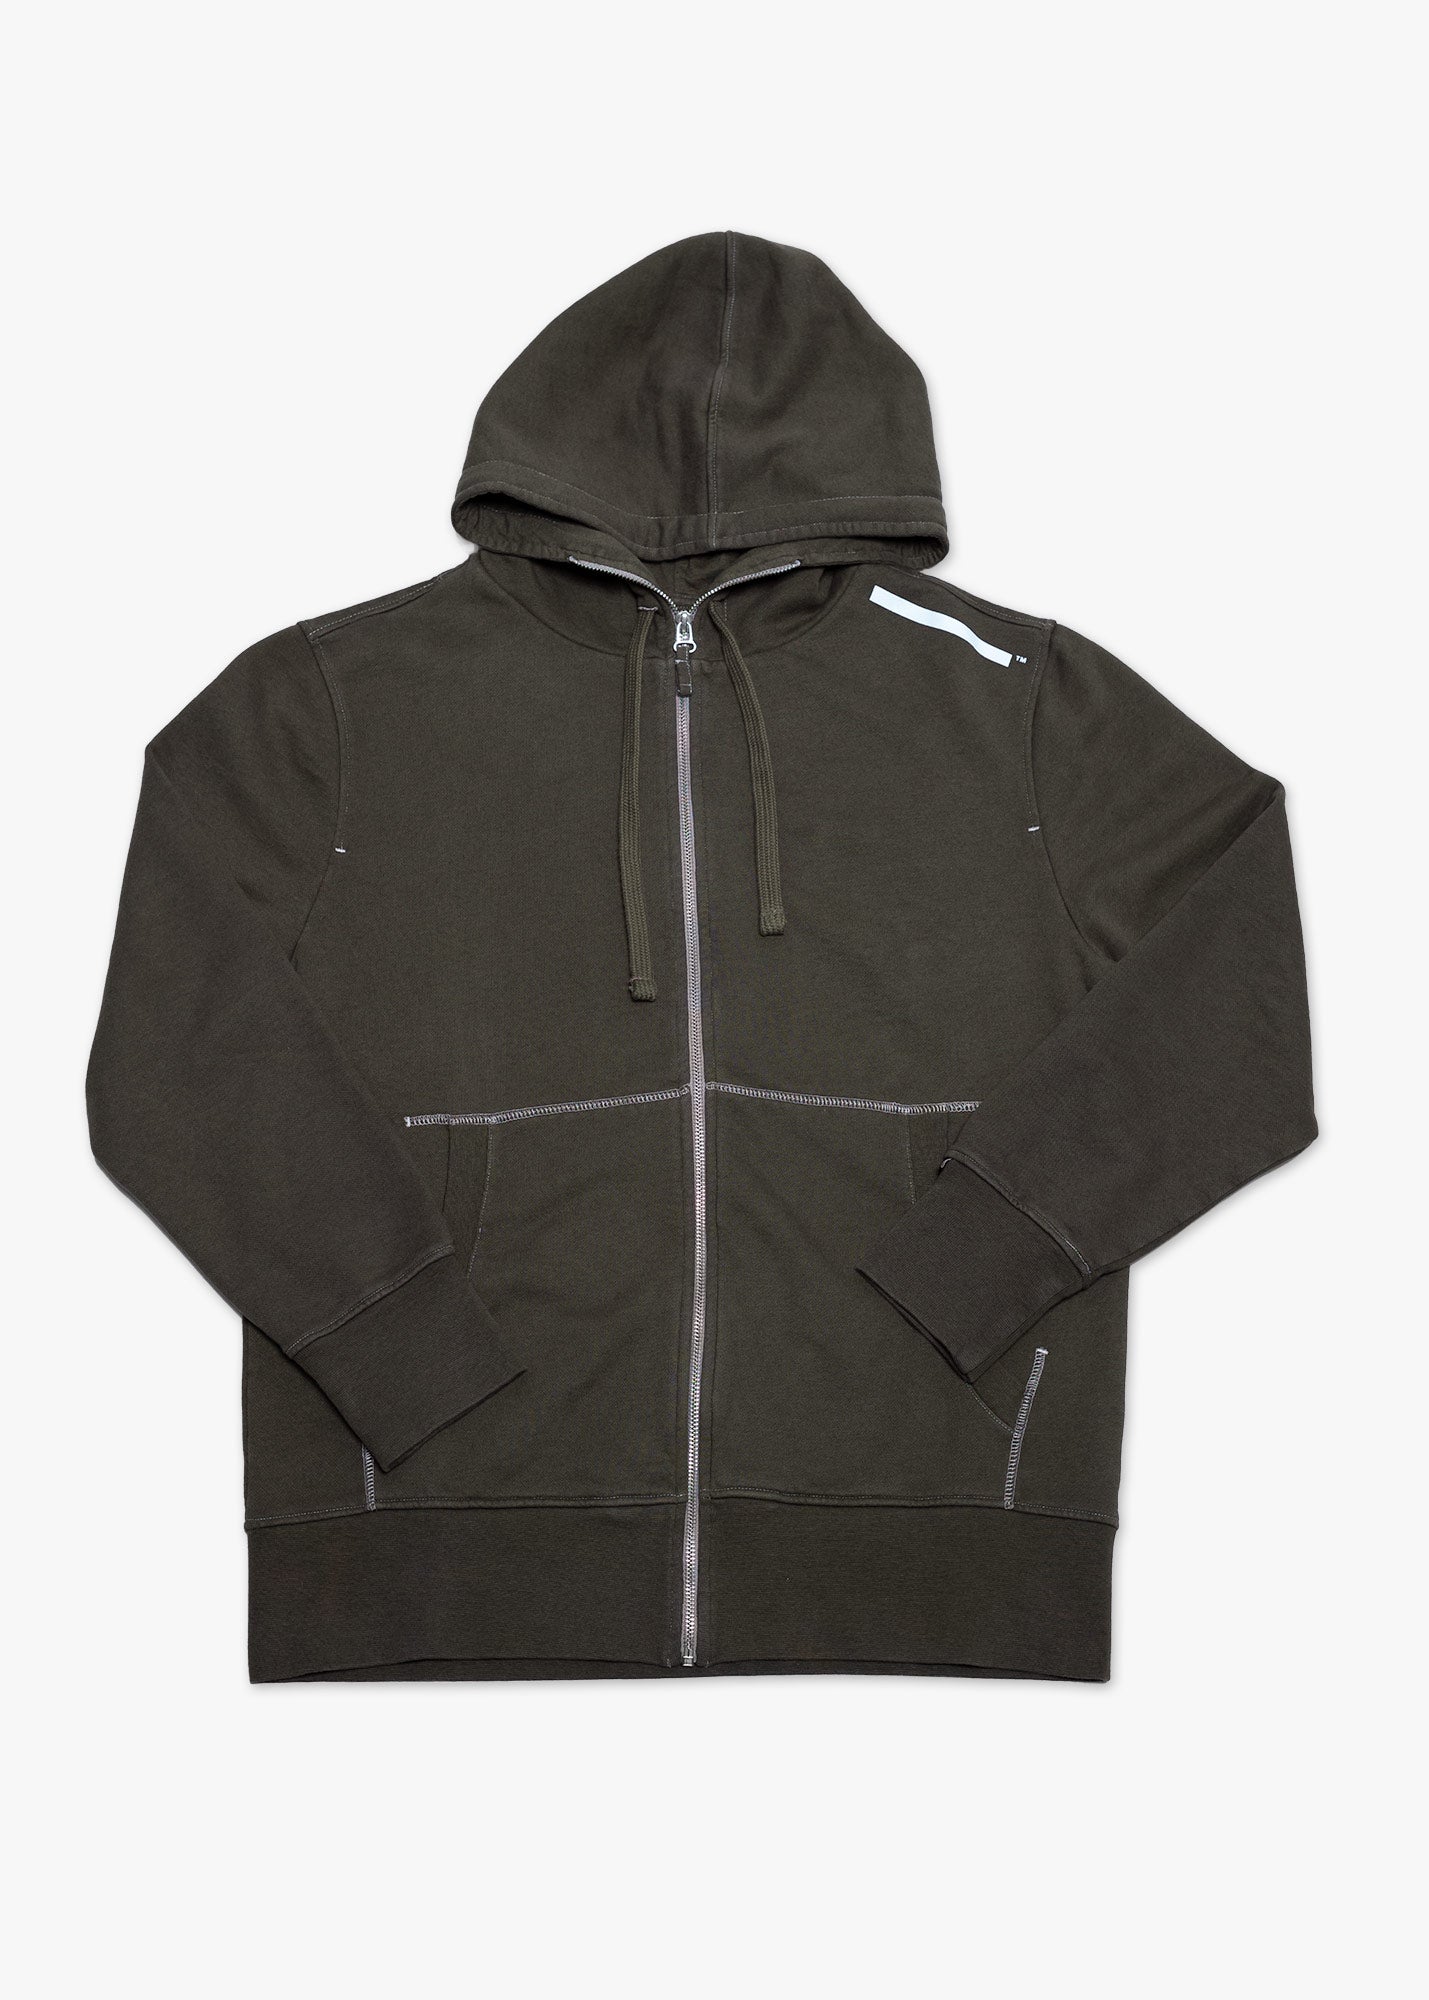 ITEM No. 14 - Zip Hoody Olive Overdyed - Standard Project